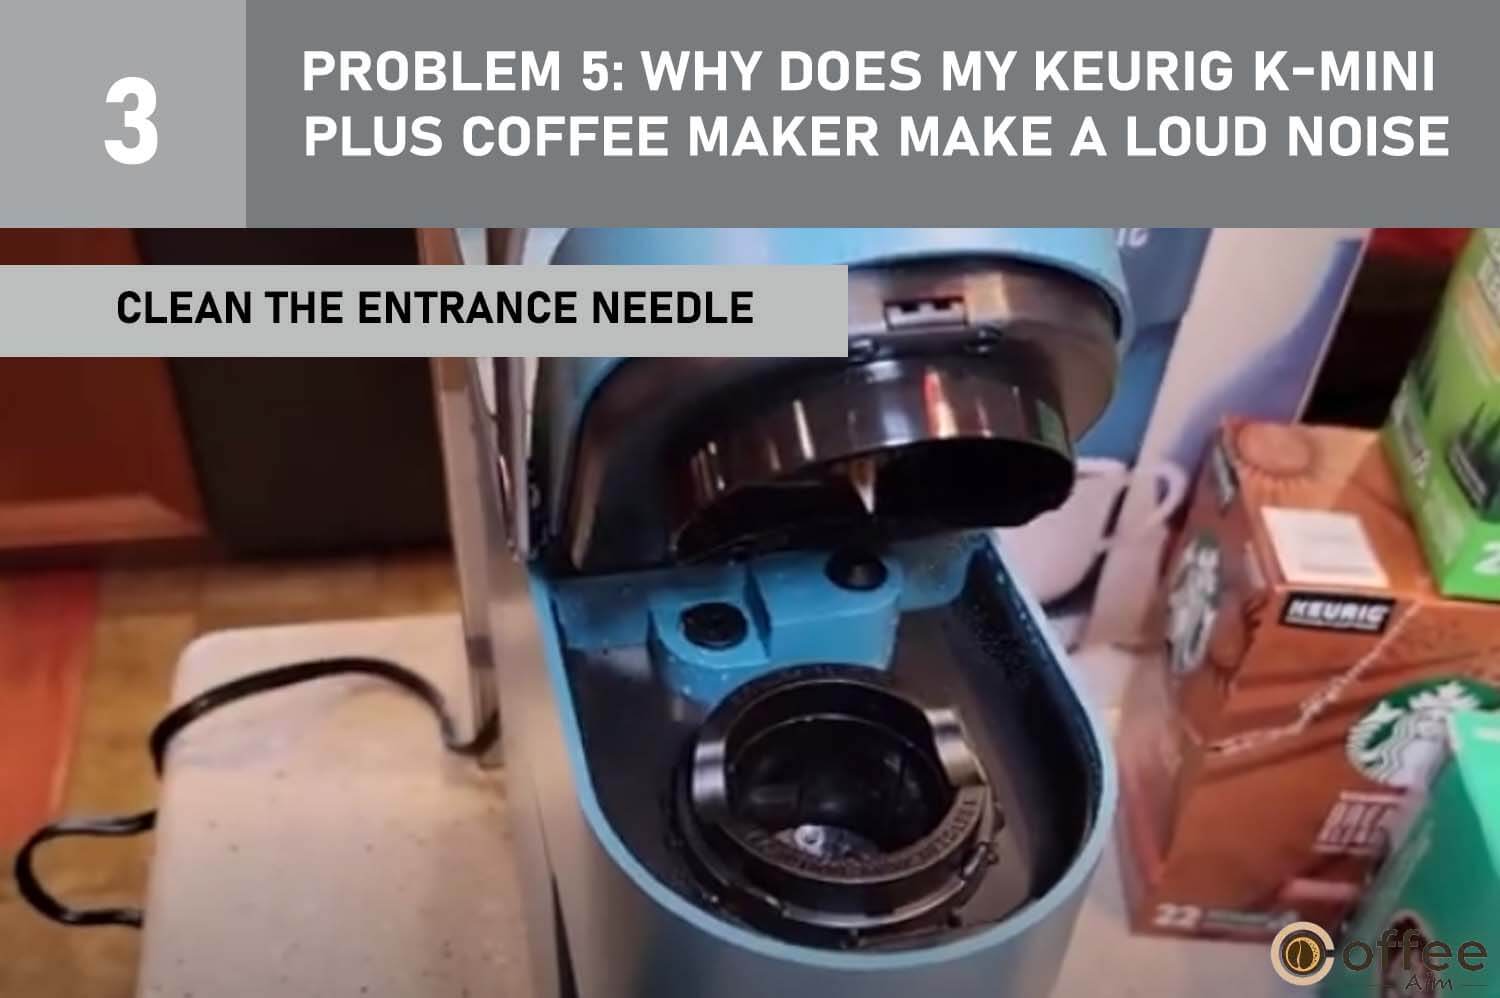 This image depicts the "Clean the Entrance Needle" step for addressing Problem 5: "Why Does My Keurig K-Mini Plus Coffee Maker Make a Loud Noise?" in our article titled "Keurig K-Mini Plus Problems."




